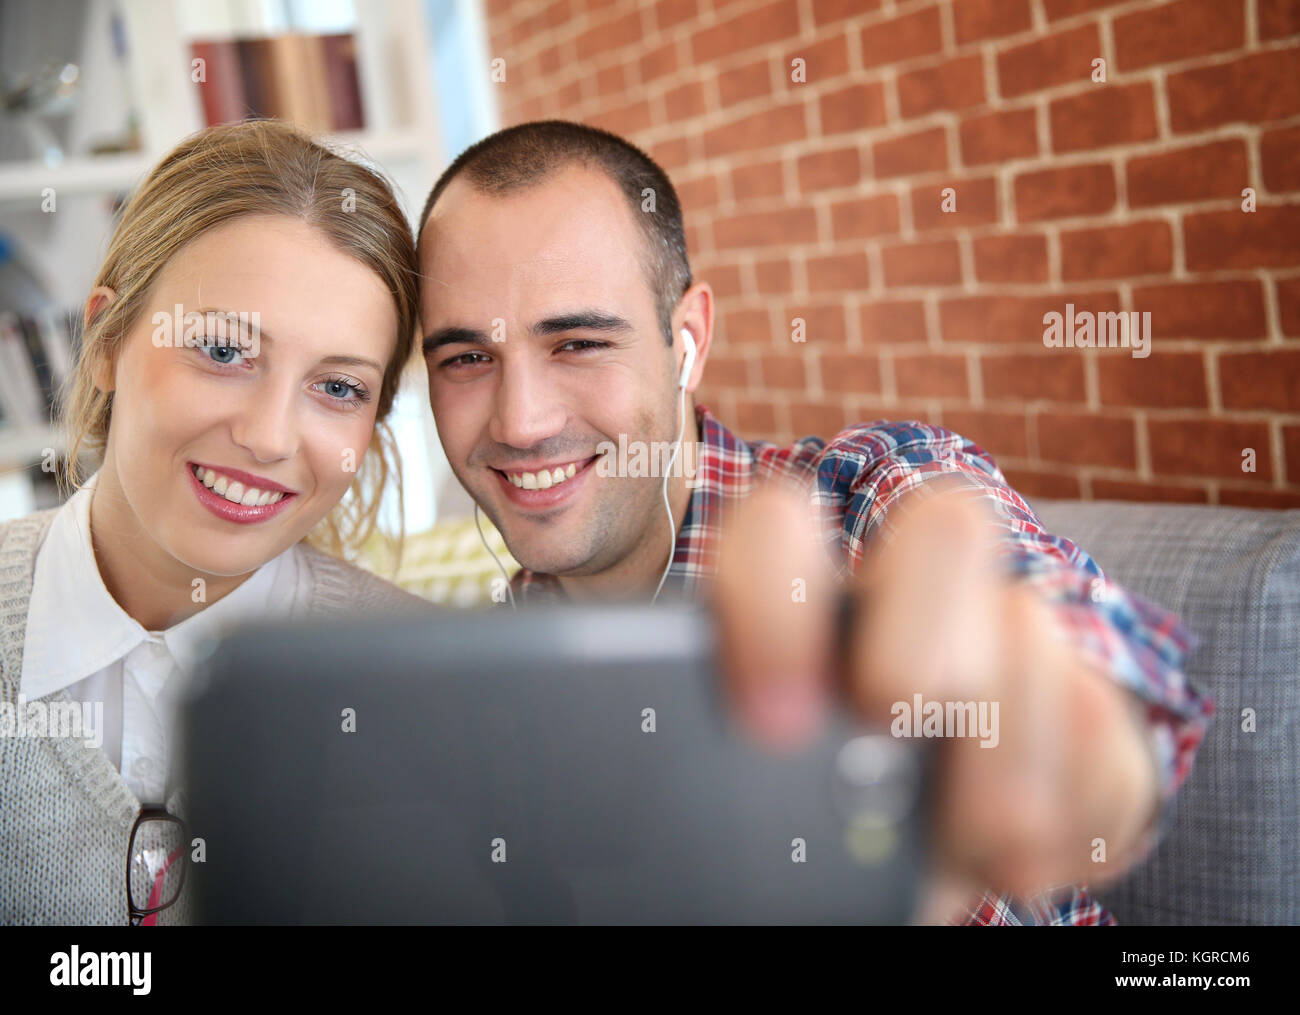 Friends taking picture of themselves with smartphone Stock Photo